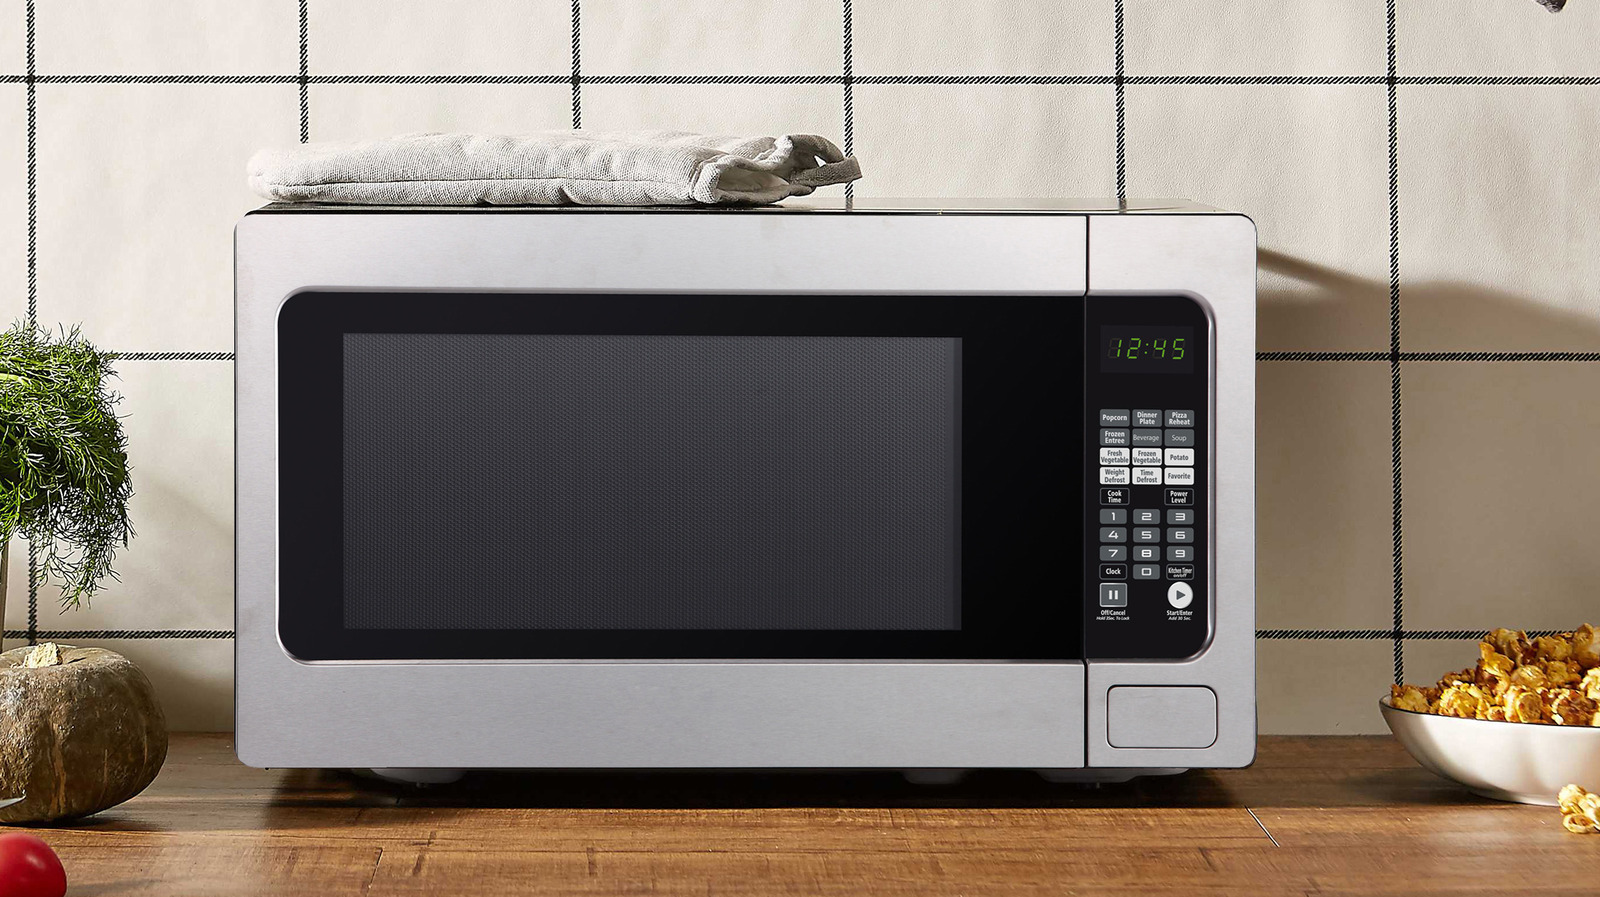 https://www.mashed.com/img/gallery/the-best-microwaves-of-2022/l-intro-1652811470.jpg